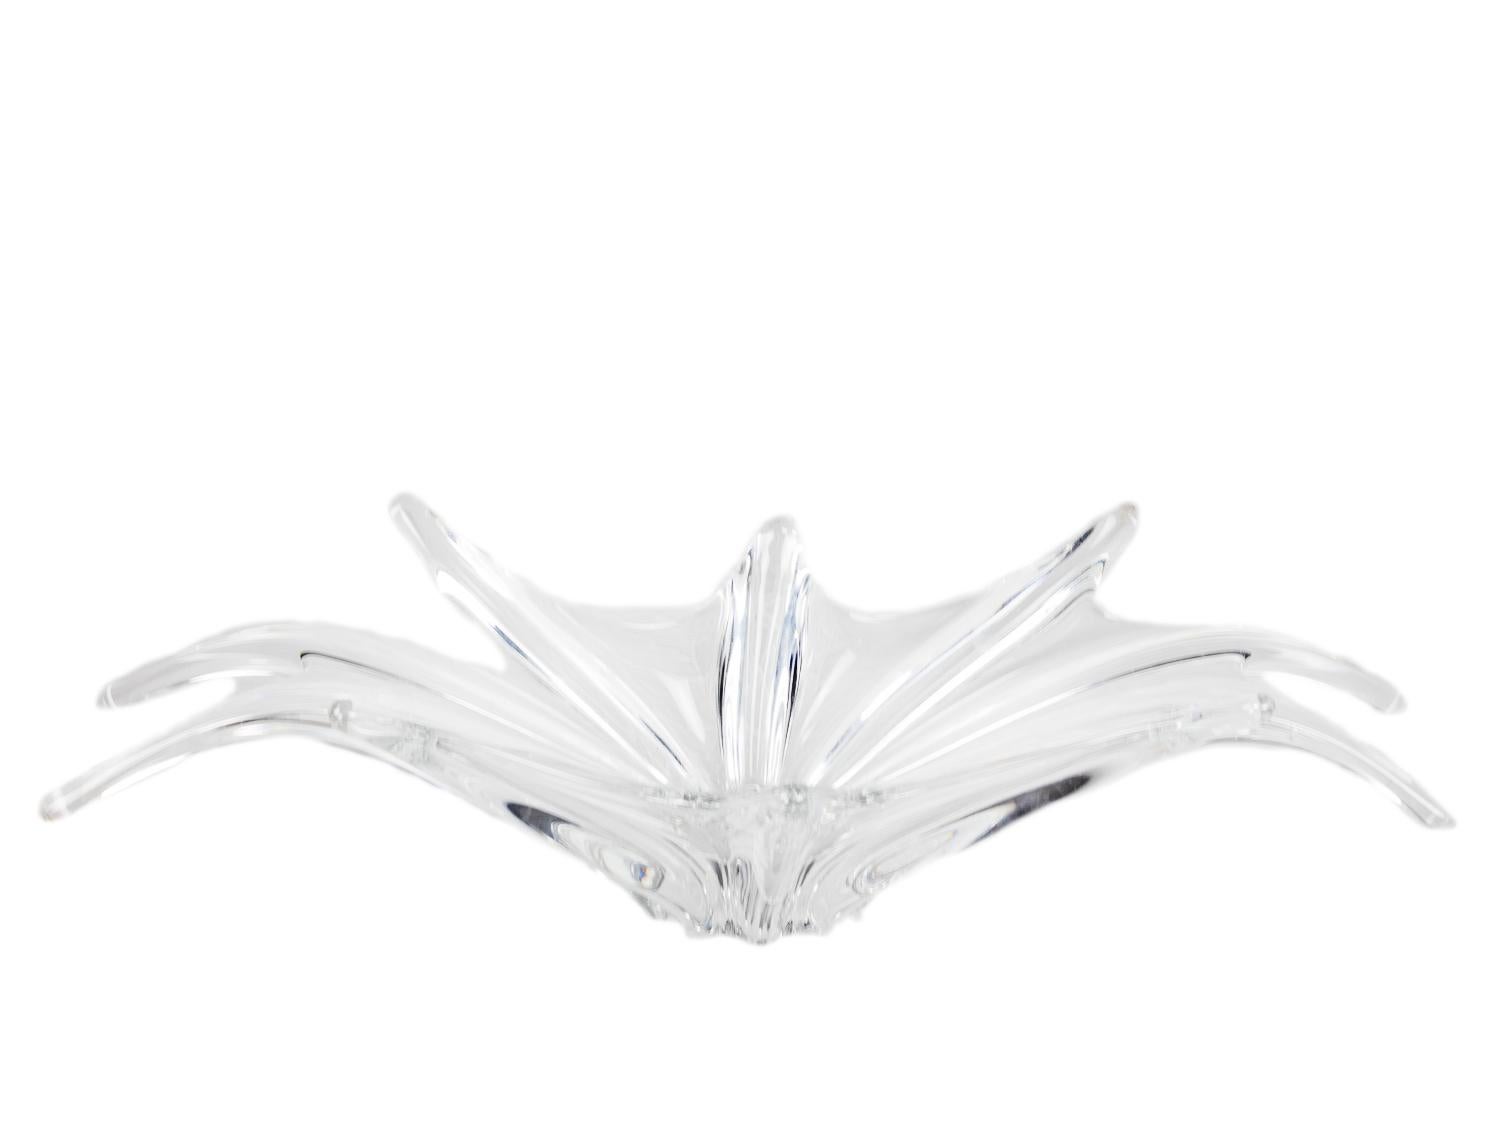 A translucent hand-blown crystal glass fruit bowl / centerpiece by Baccarat. 
On the bottom marked with an etched factory mark Baccarat from the region of Lorrene, France. 

THE BACCARAT LEGACY: THE MOLD STORAGE, ARCHIVE & MUSEUM
One can only